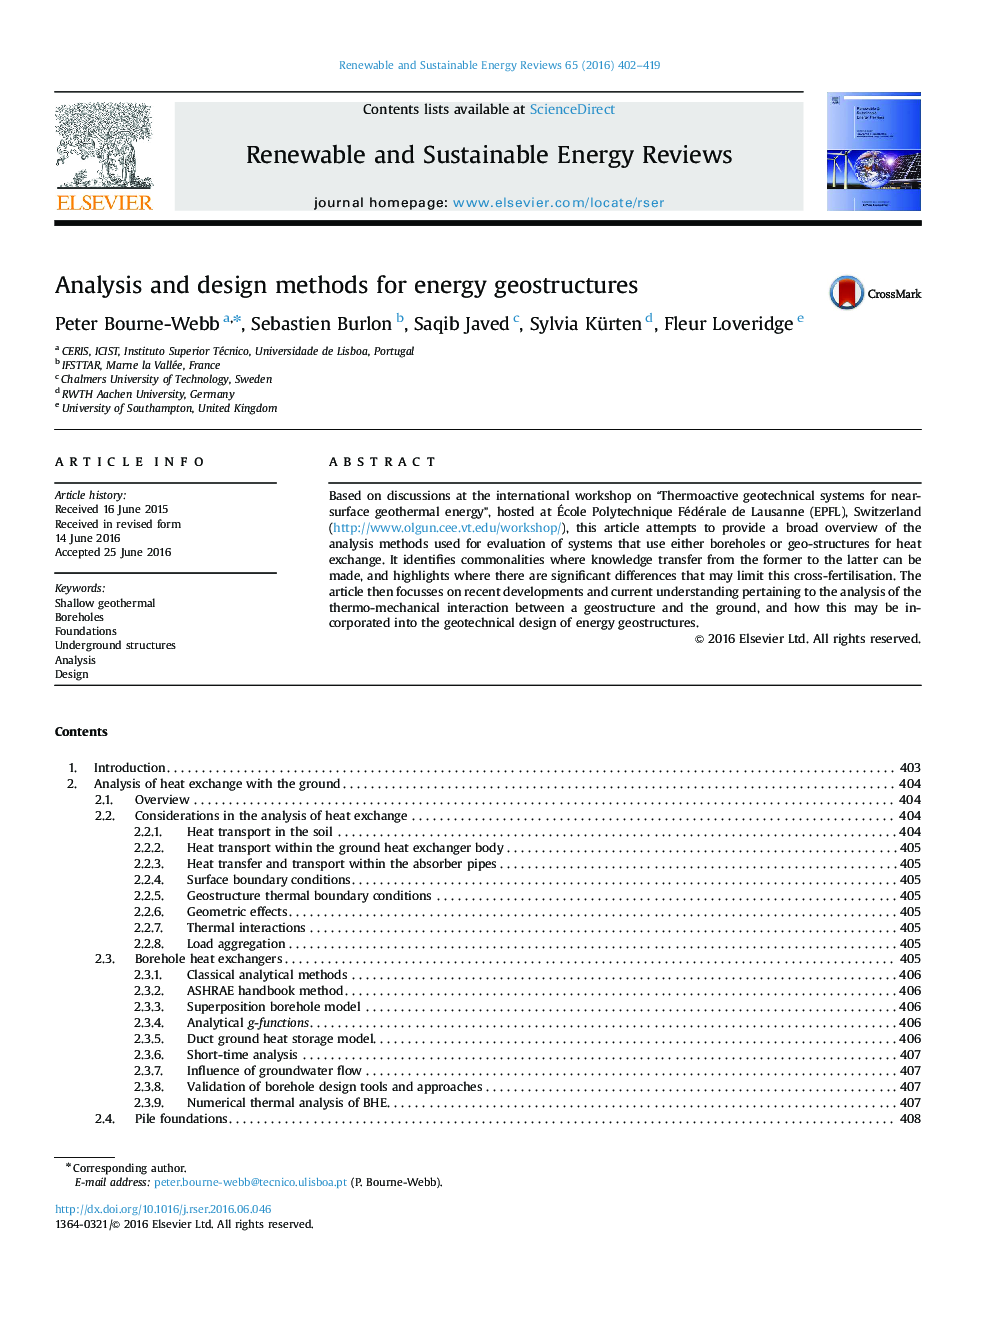 Analysis and design methods for energy geostructures